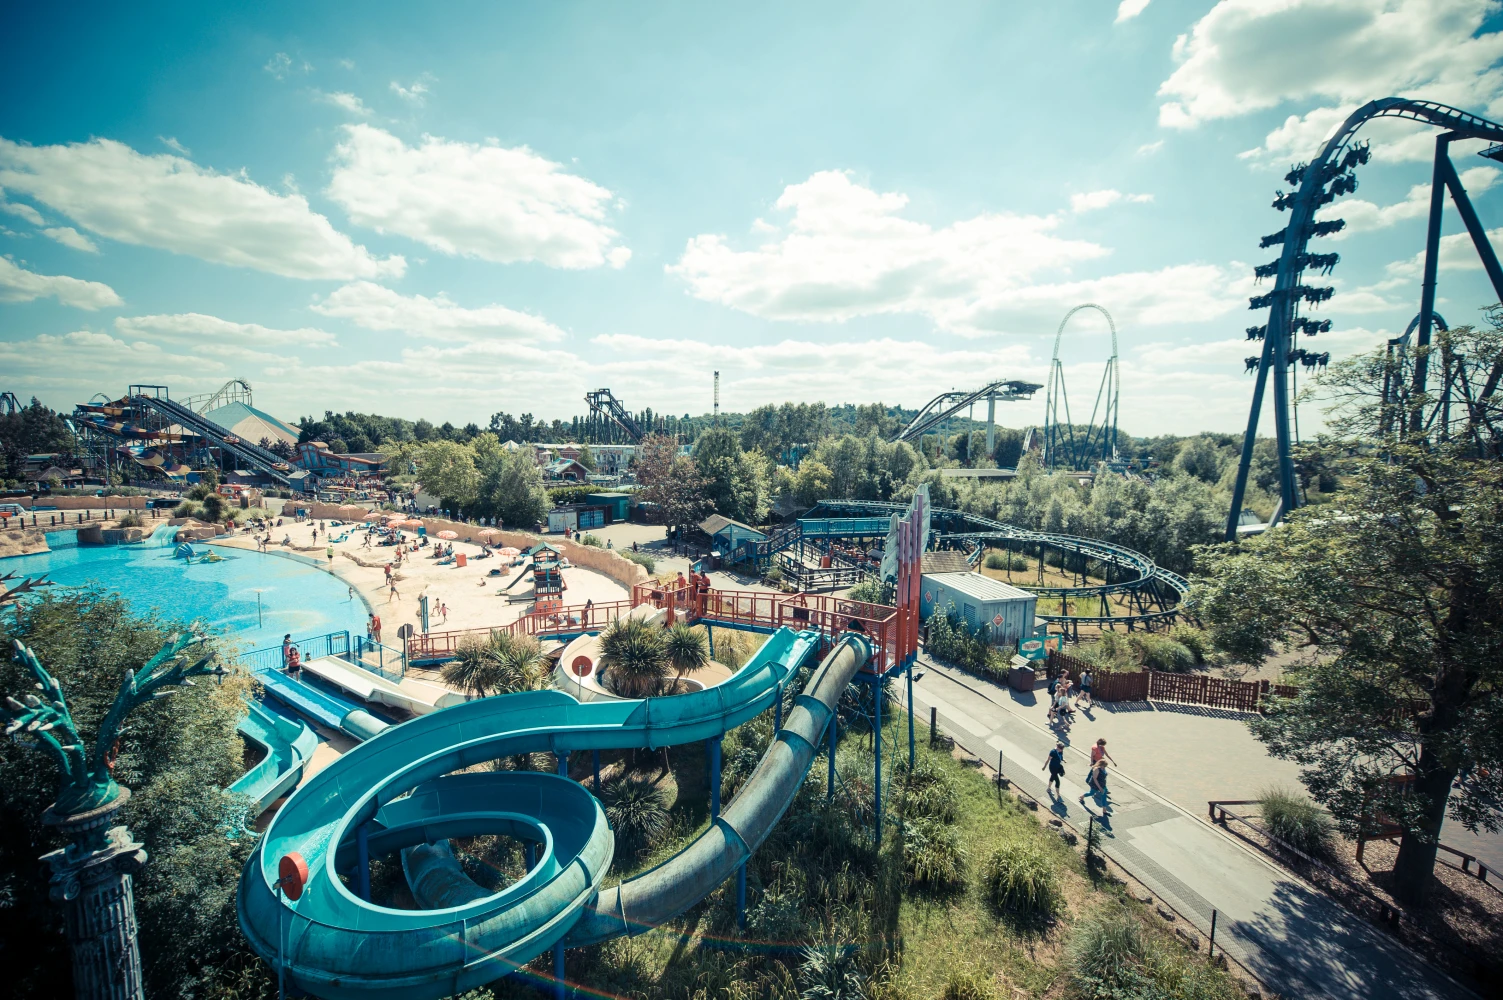 Thorpe Park Standard One Day Entry: What to expect - 3